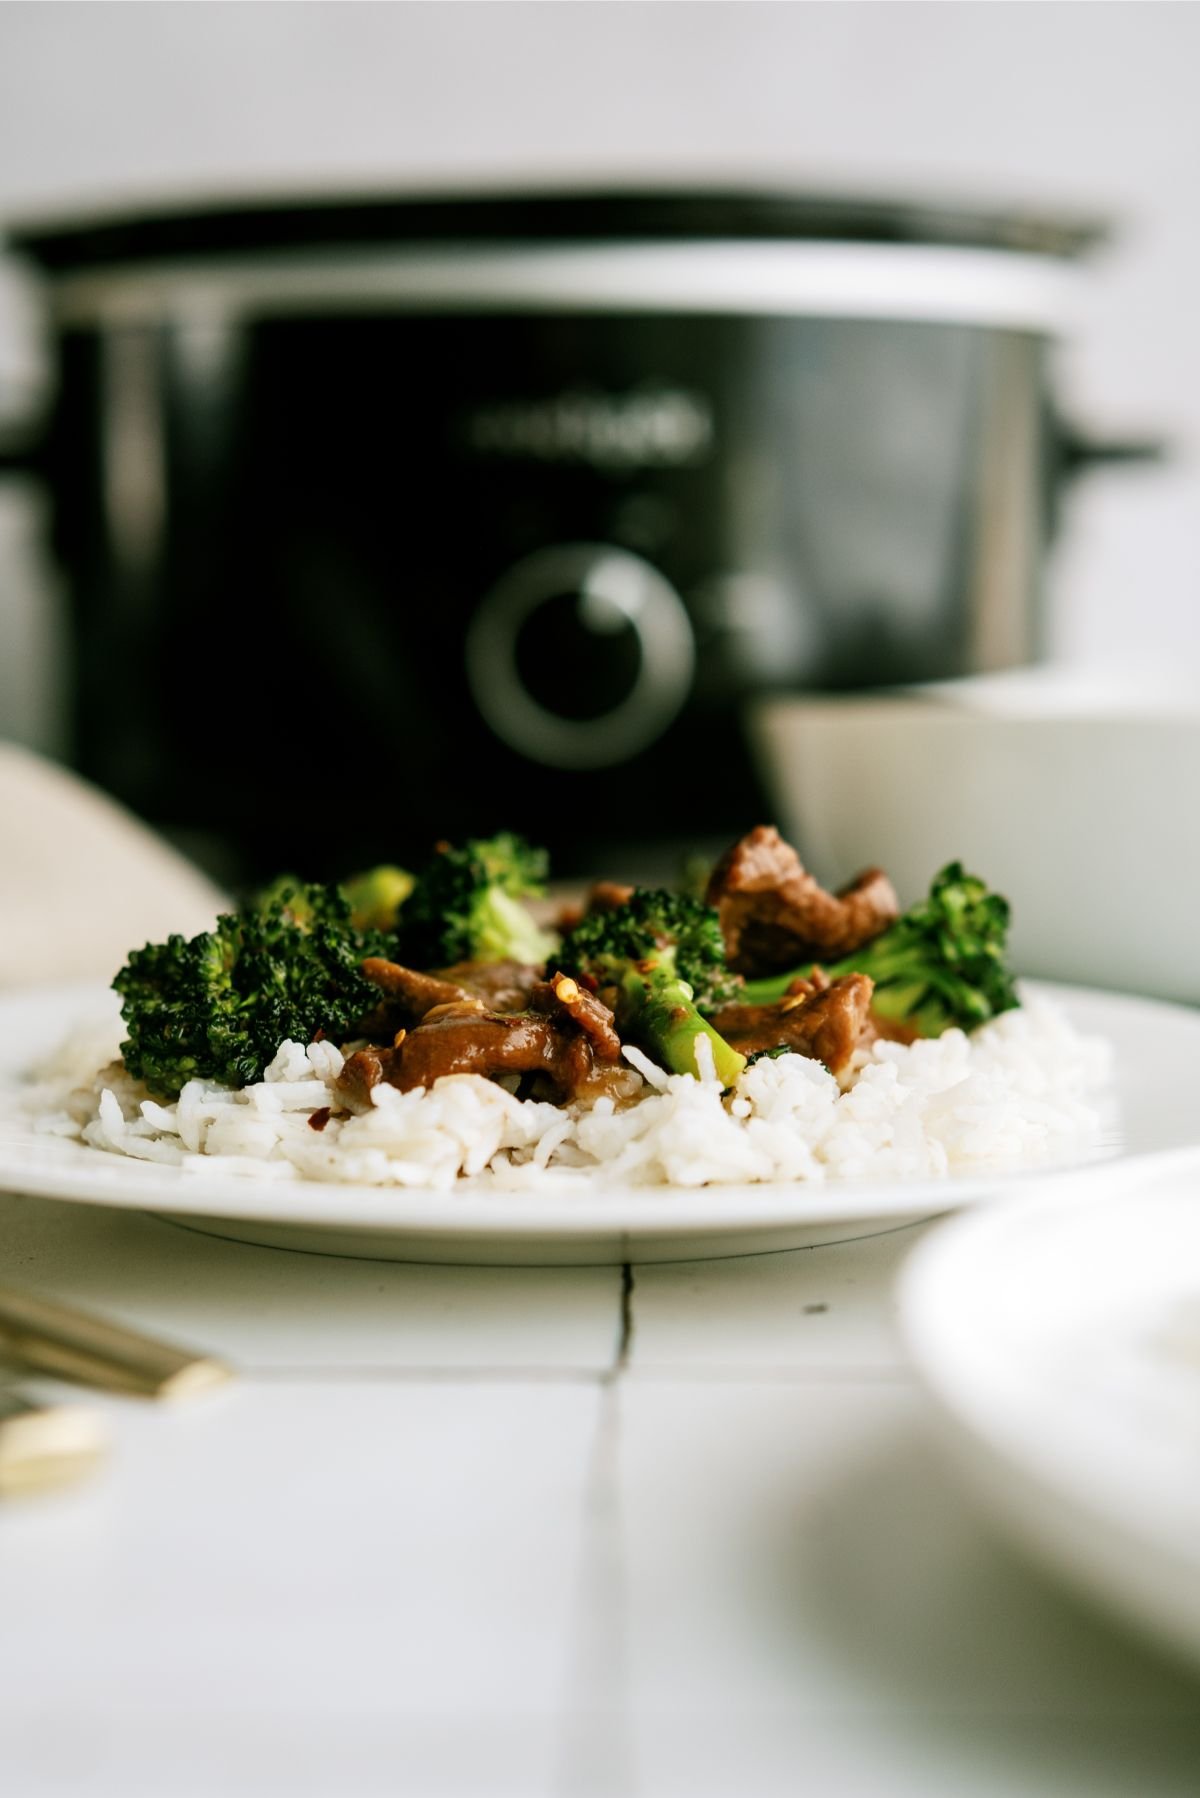 Slow Cooker Beef and Broccoli on a plate with the slow cooker in the background